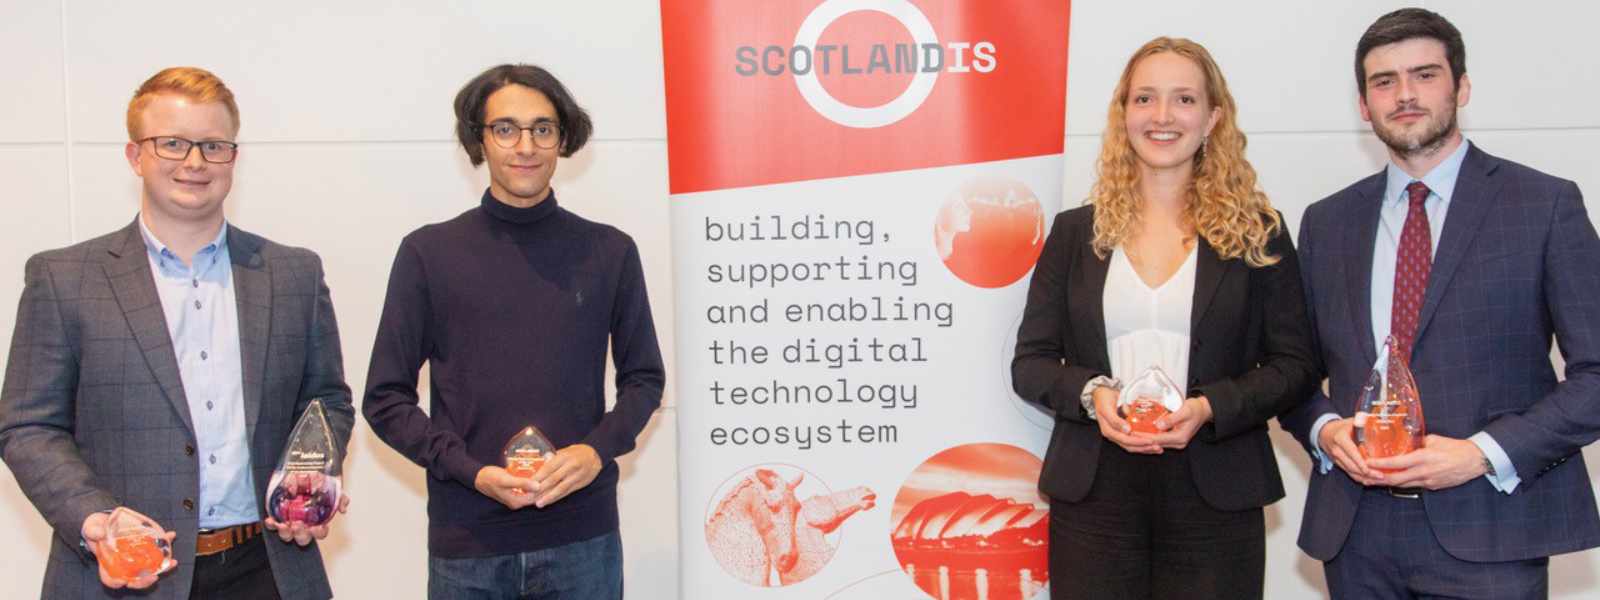 Callum Inglis, left, with other Young Software Engineer award winners.